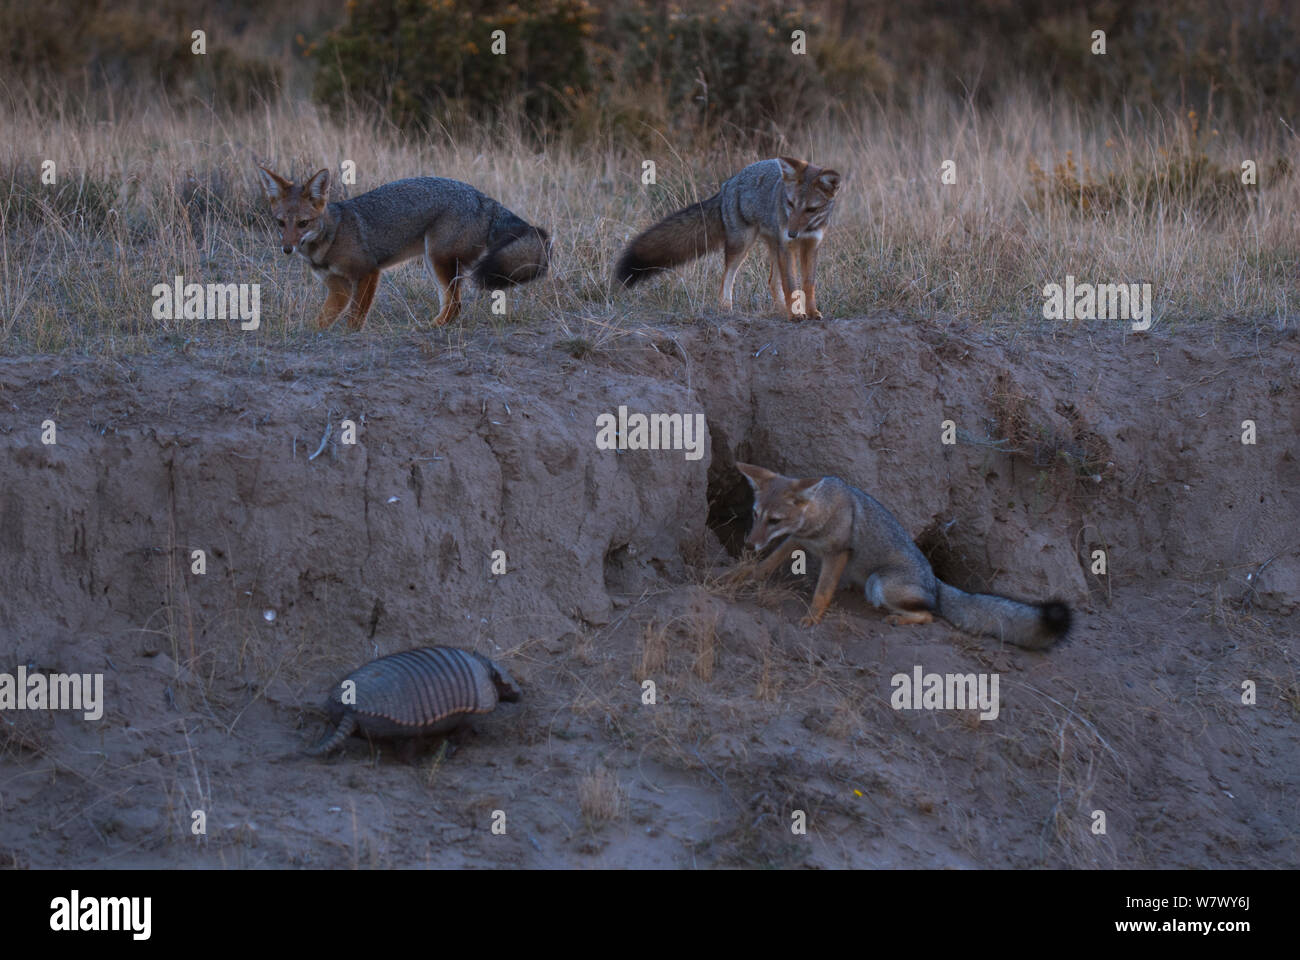 Three Argentine grey foxes (Lycalopex griseus) looking at Large hairy armadillo (Chaetophractus villosus) Valdes Peninsula, Chubut, Patagonia, Argentina. Stock Photo